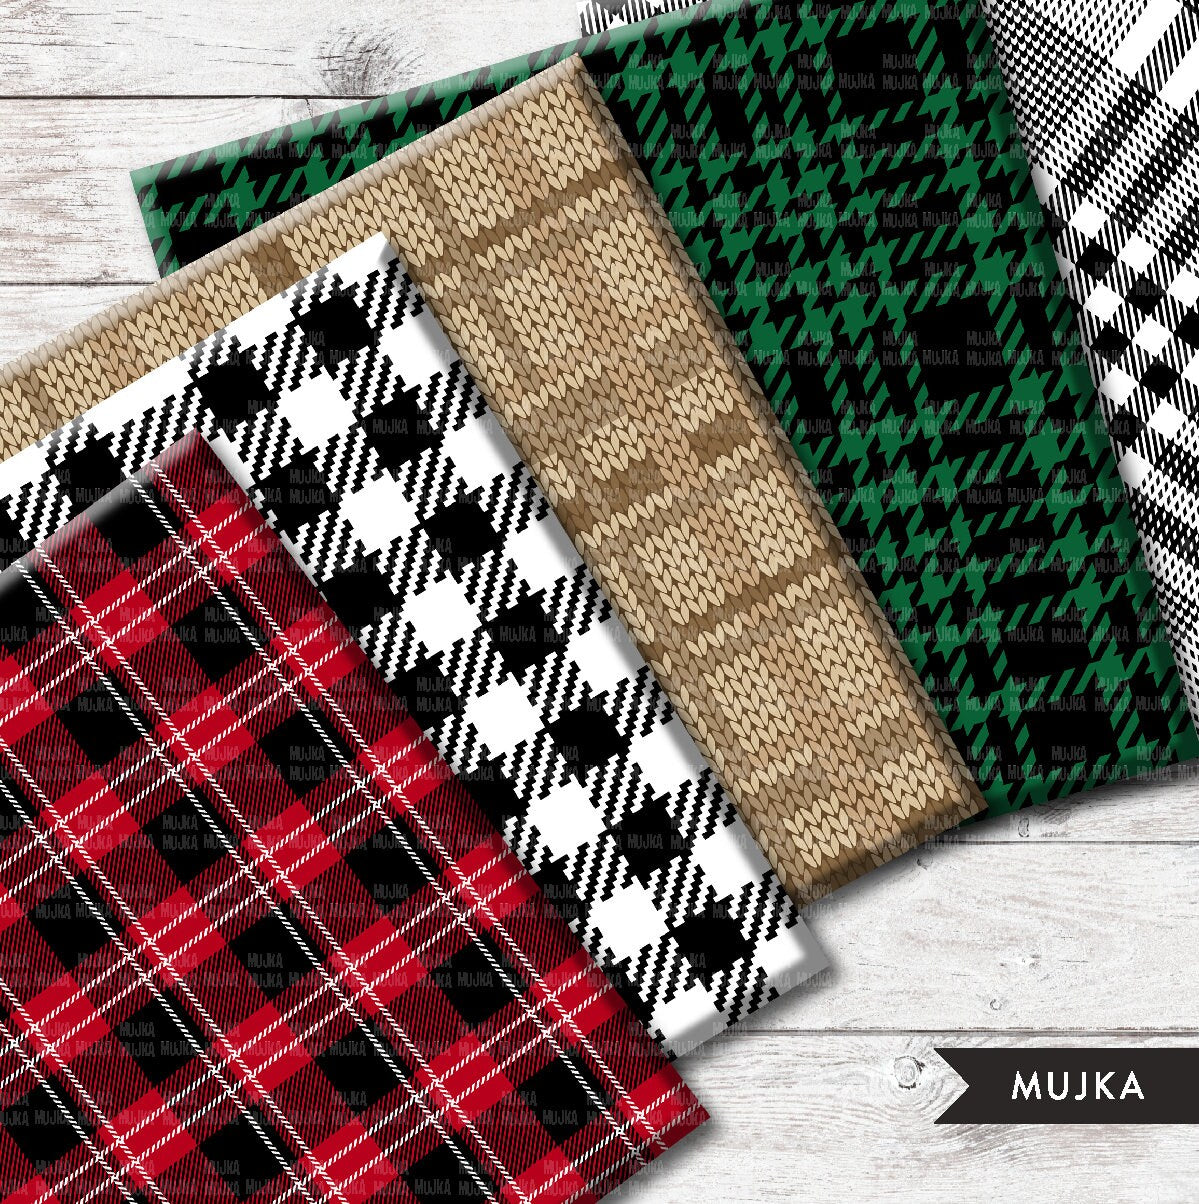 Christmas digital papers, plaid digital papers, buffalo plaid png, plaid png, Christmas digital, lumberjack patterns, scrapbook papers png